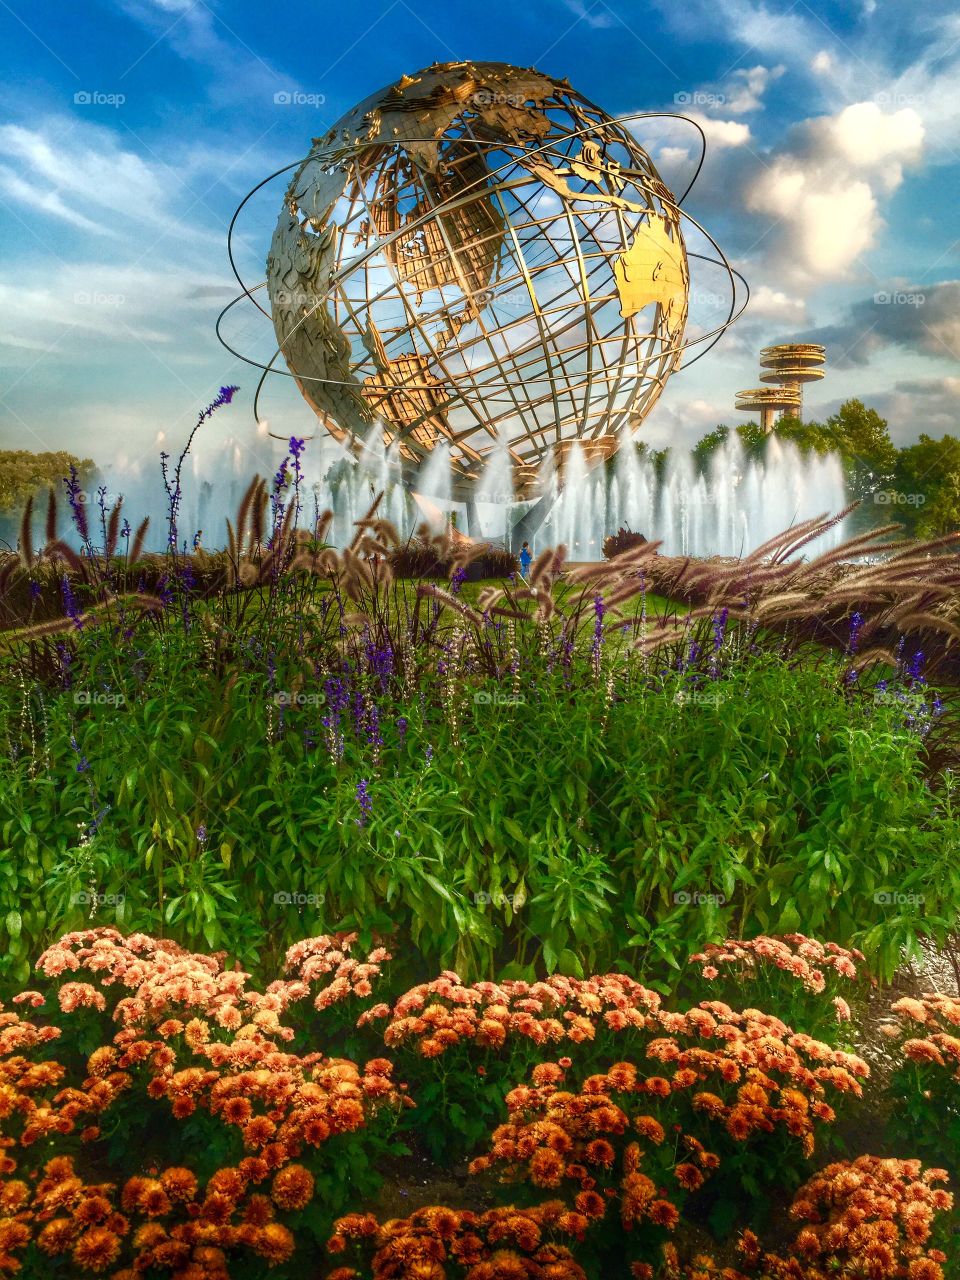 Globe. The unisphere was conceived as the theme symbol of 1964-1965 New York world's Fair.